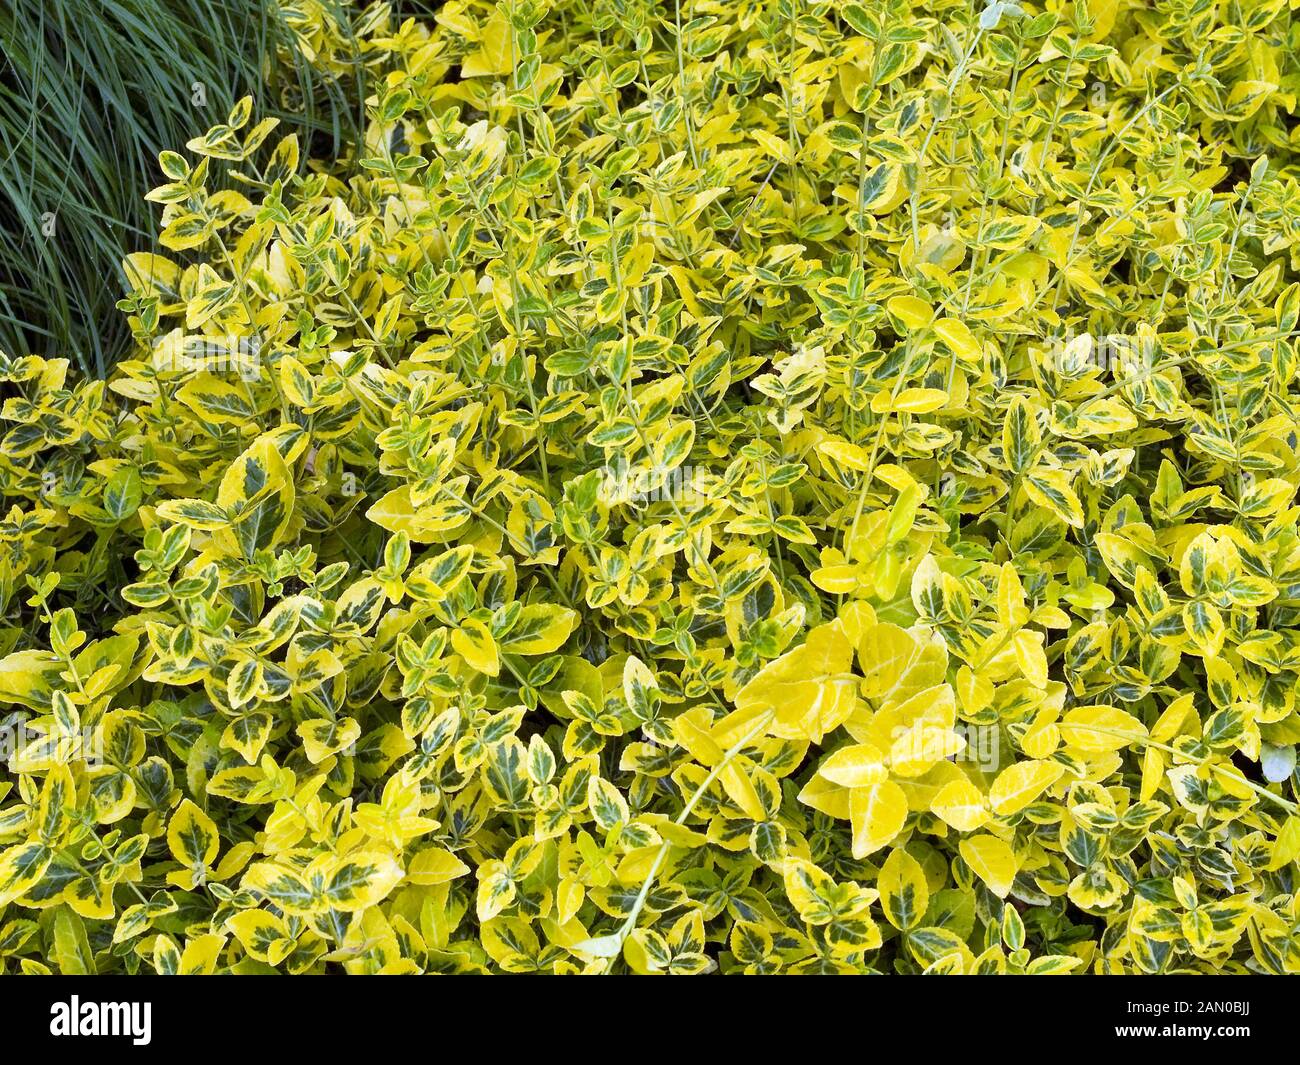 EUONYMUS FORTUNEI EMERALD 'N GOLD Stock Photo